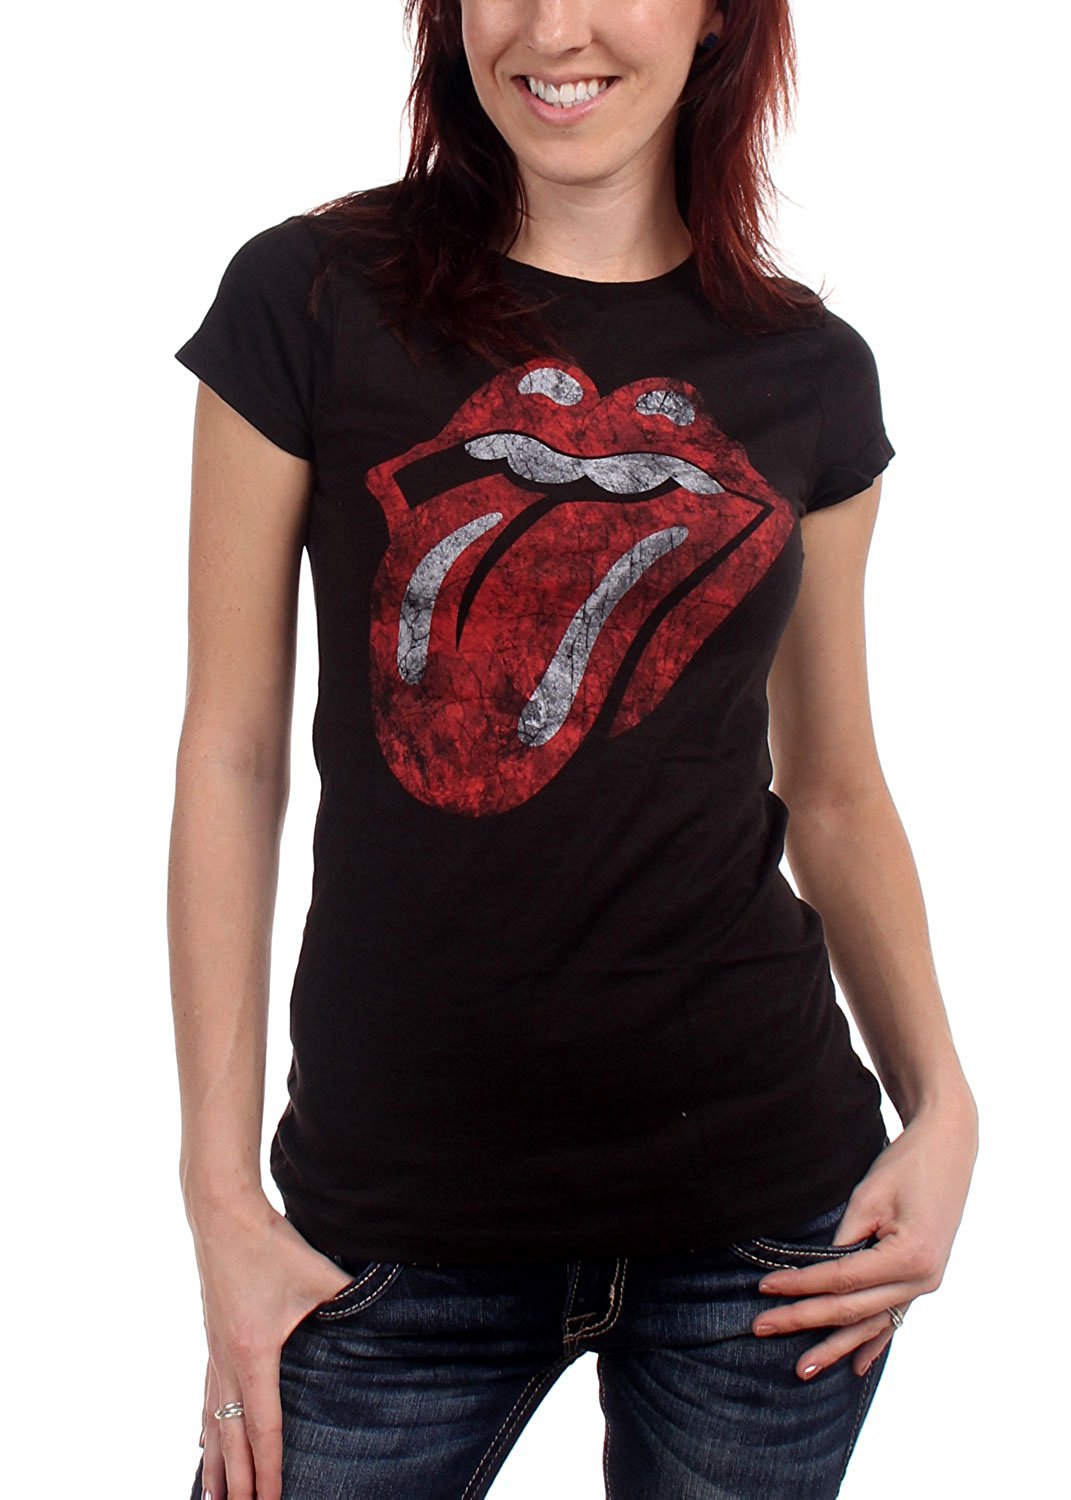 ROLLING STONES Distressed Tongue Girl Junior T-Shirt M - image 1 of 2